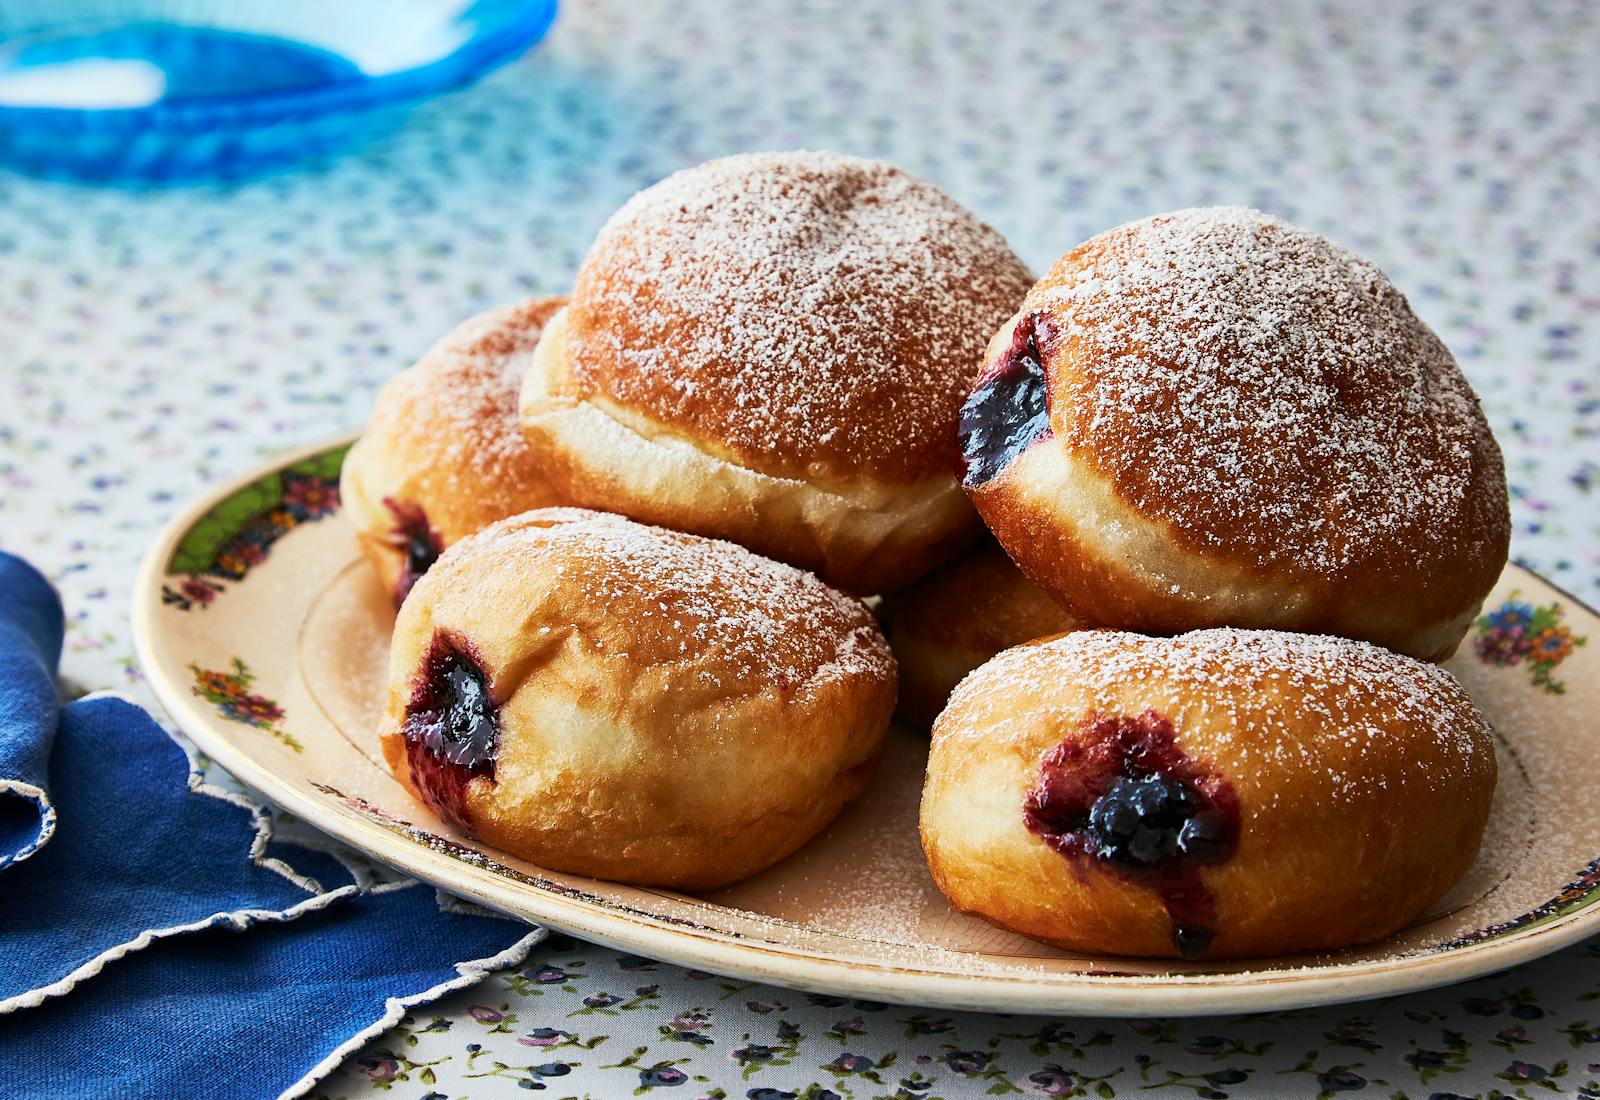 Sufganiyot filled with jam and sprinkled with powdered sugar.